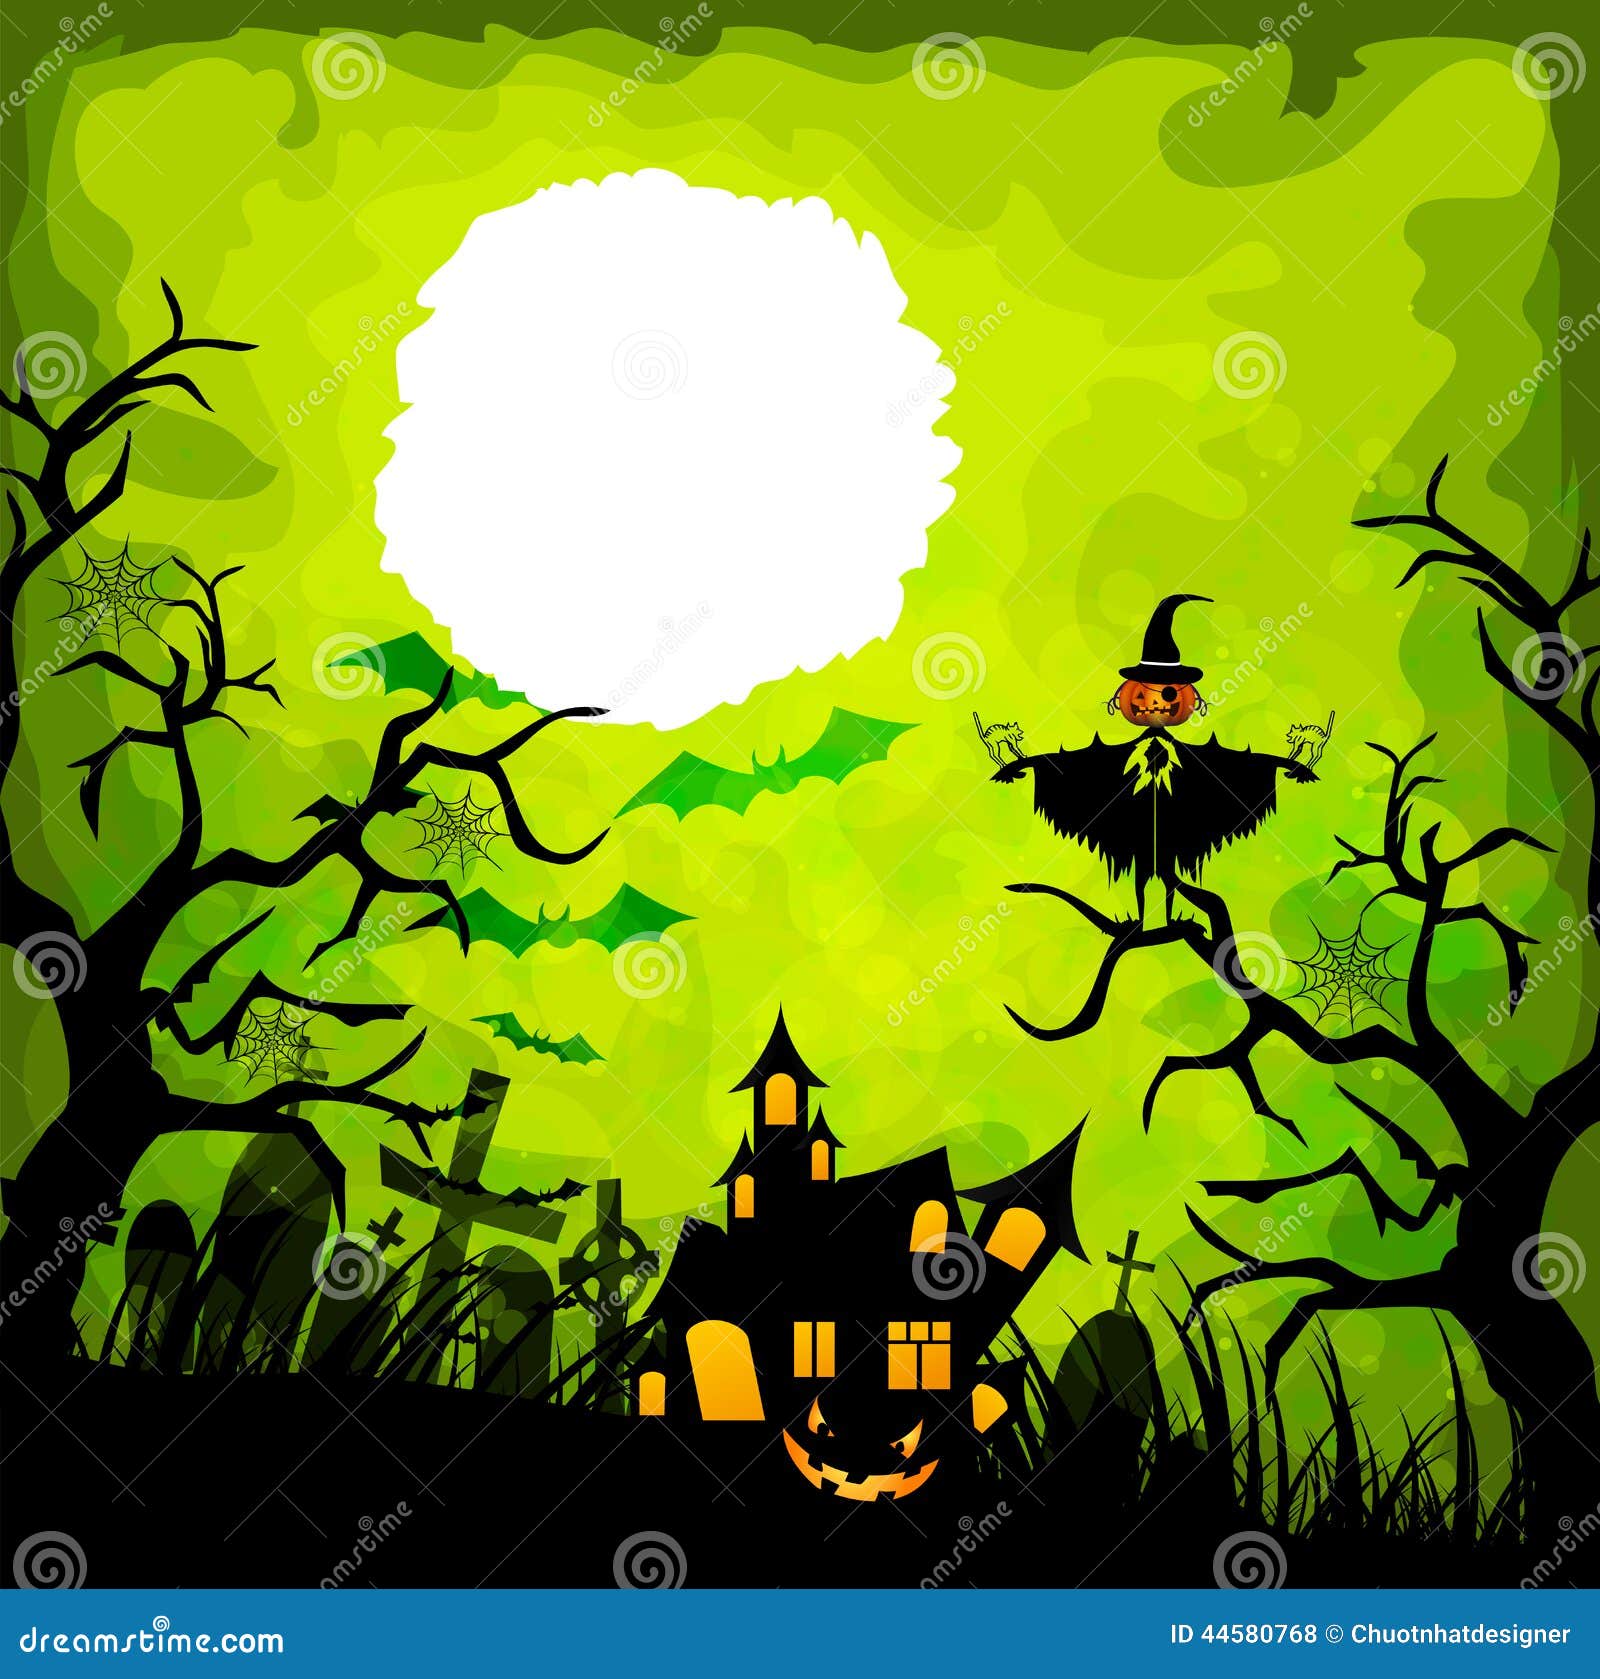 Halloween green background stock vector. Illustration of drawing - 44580768